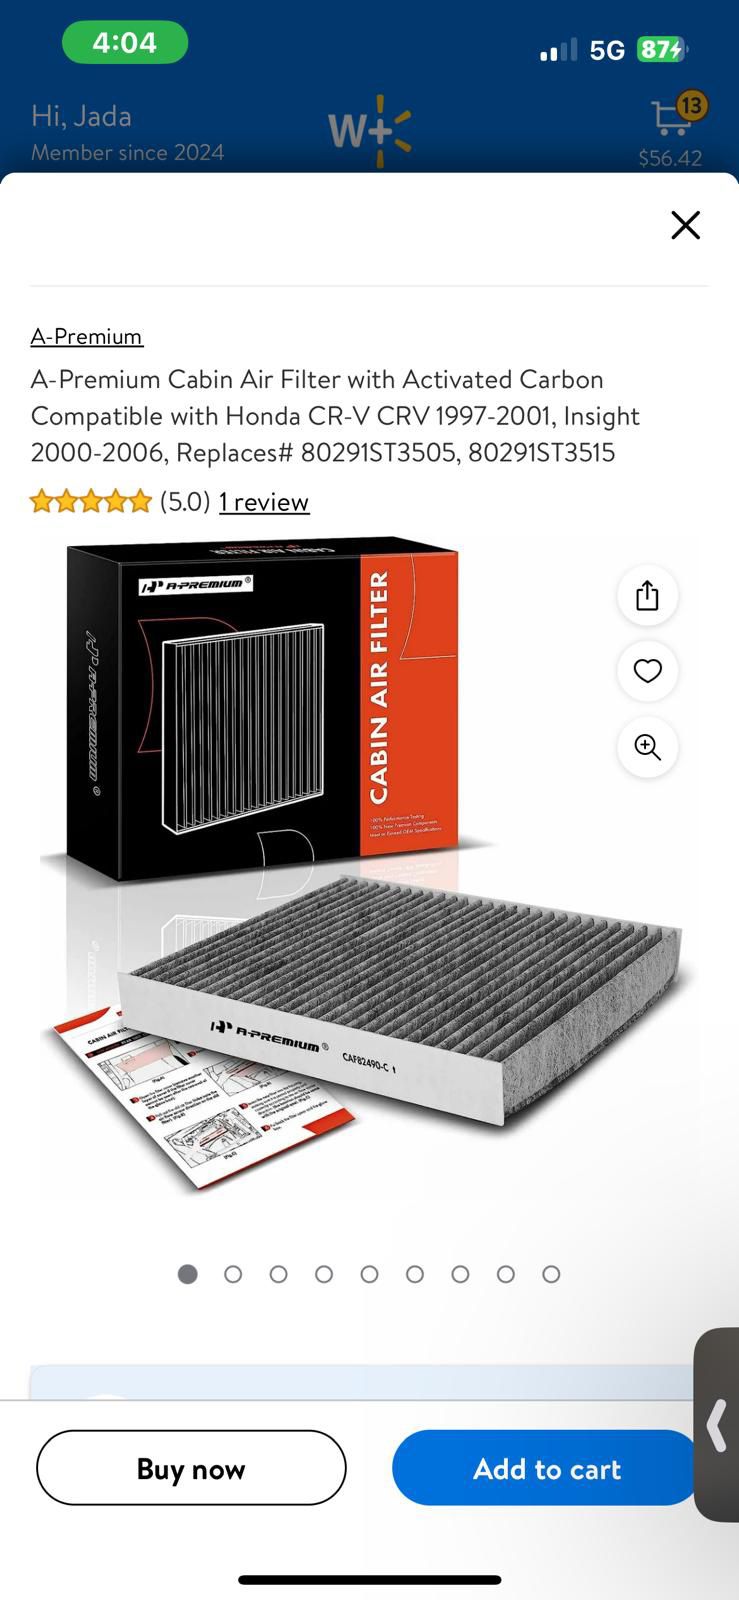 A Premium Cabin Air Filter With Activated Carbon For Honda Cars